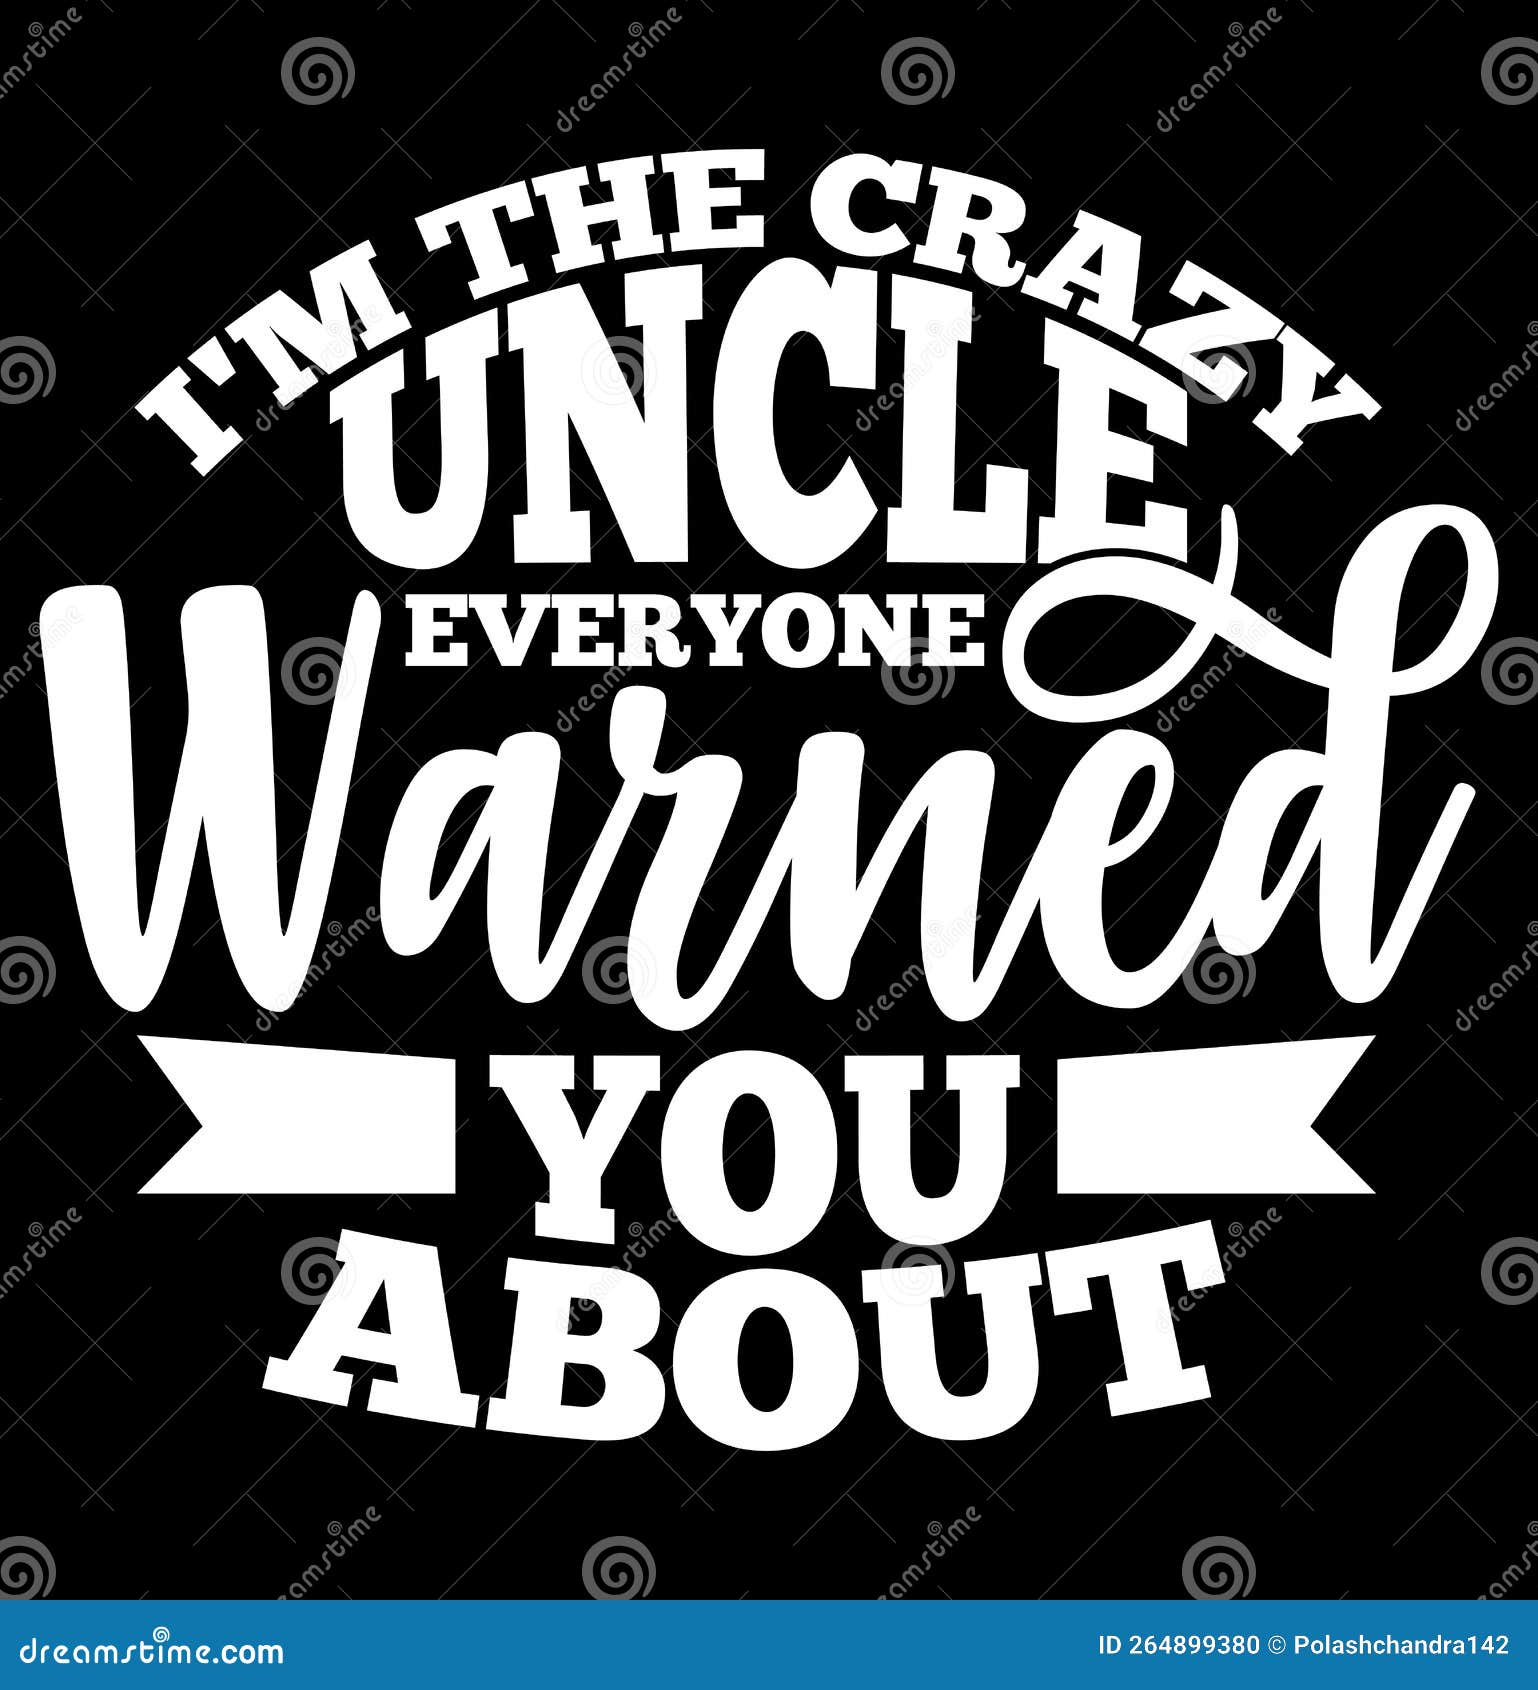 i'm the crazy uncle everyone warned you about typography t shirt graphic